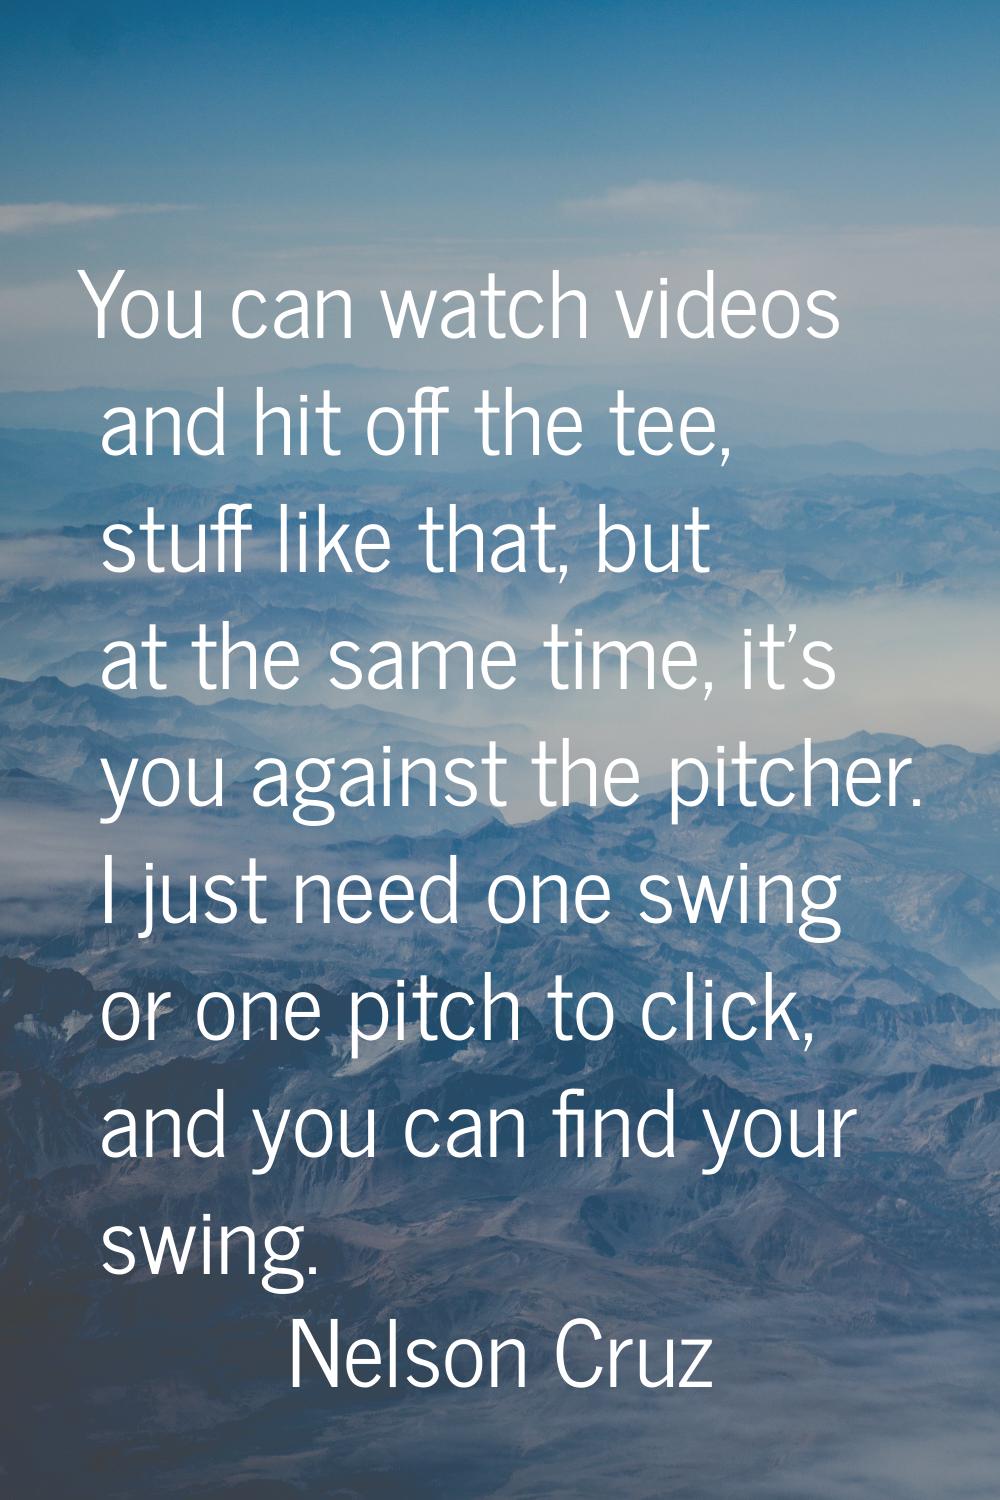 You can watch videos and hit off the tee, stuff like that, but at the same time, it's you against t